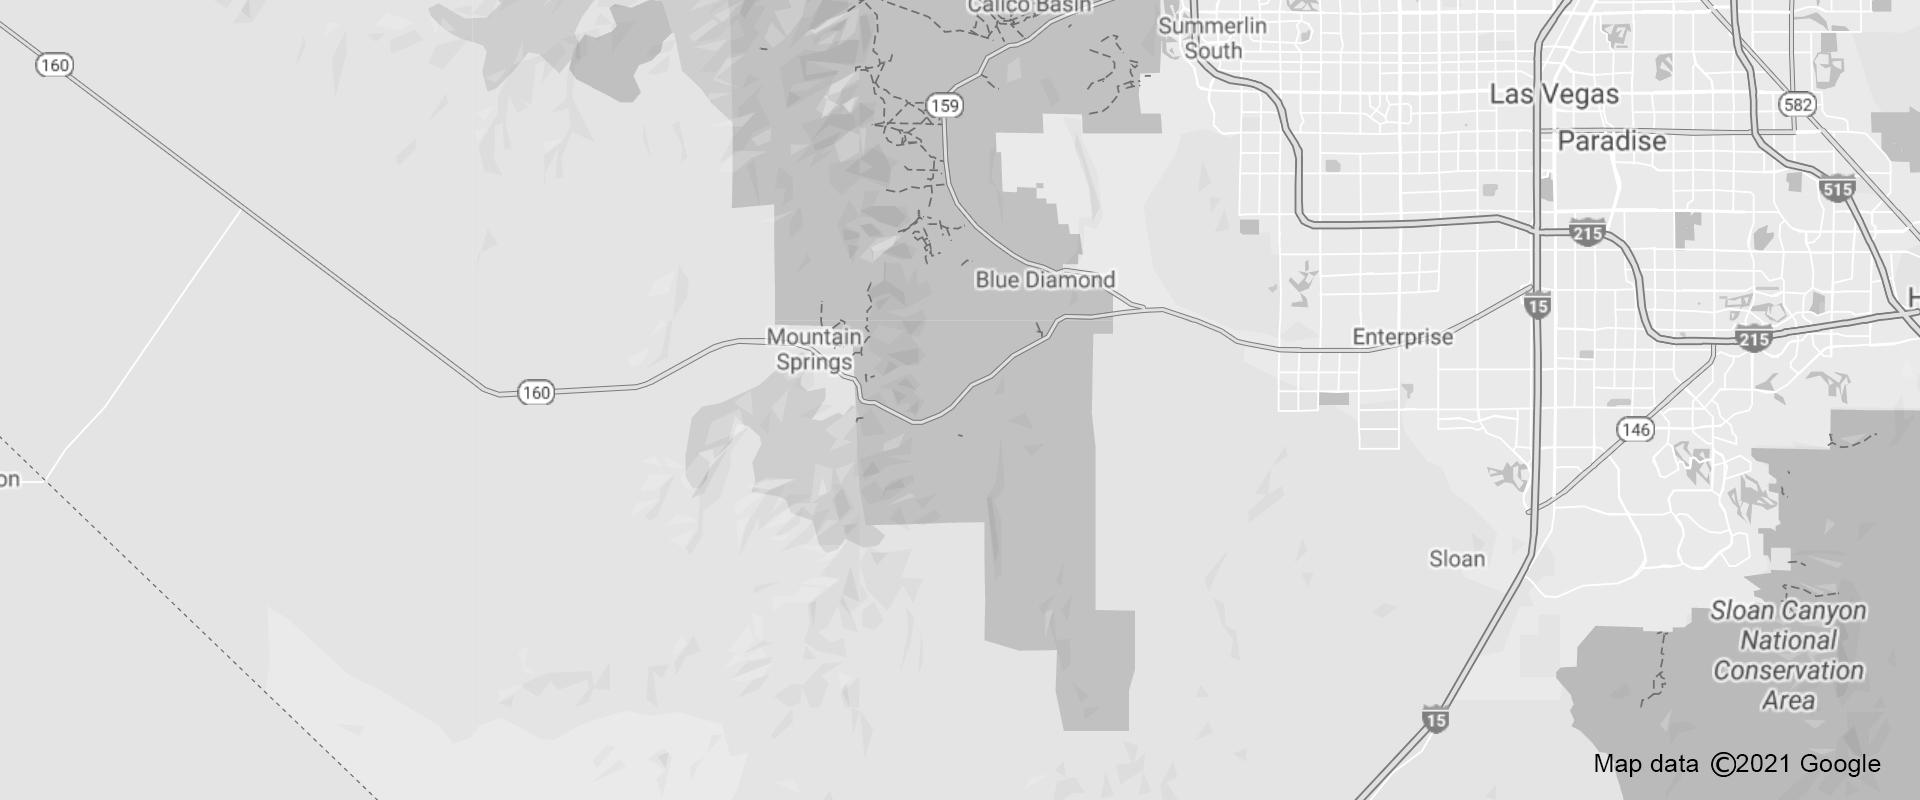 map of southern highlands nevada